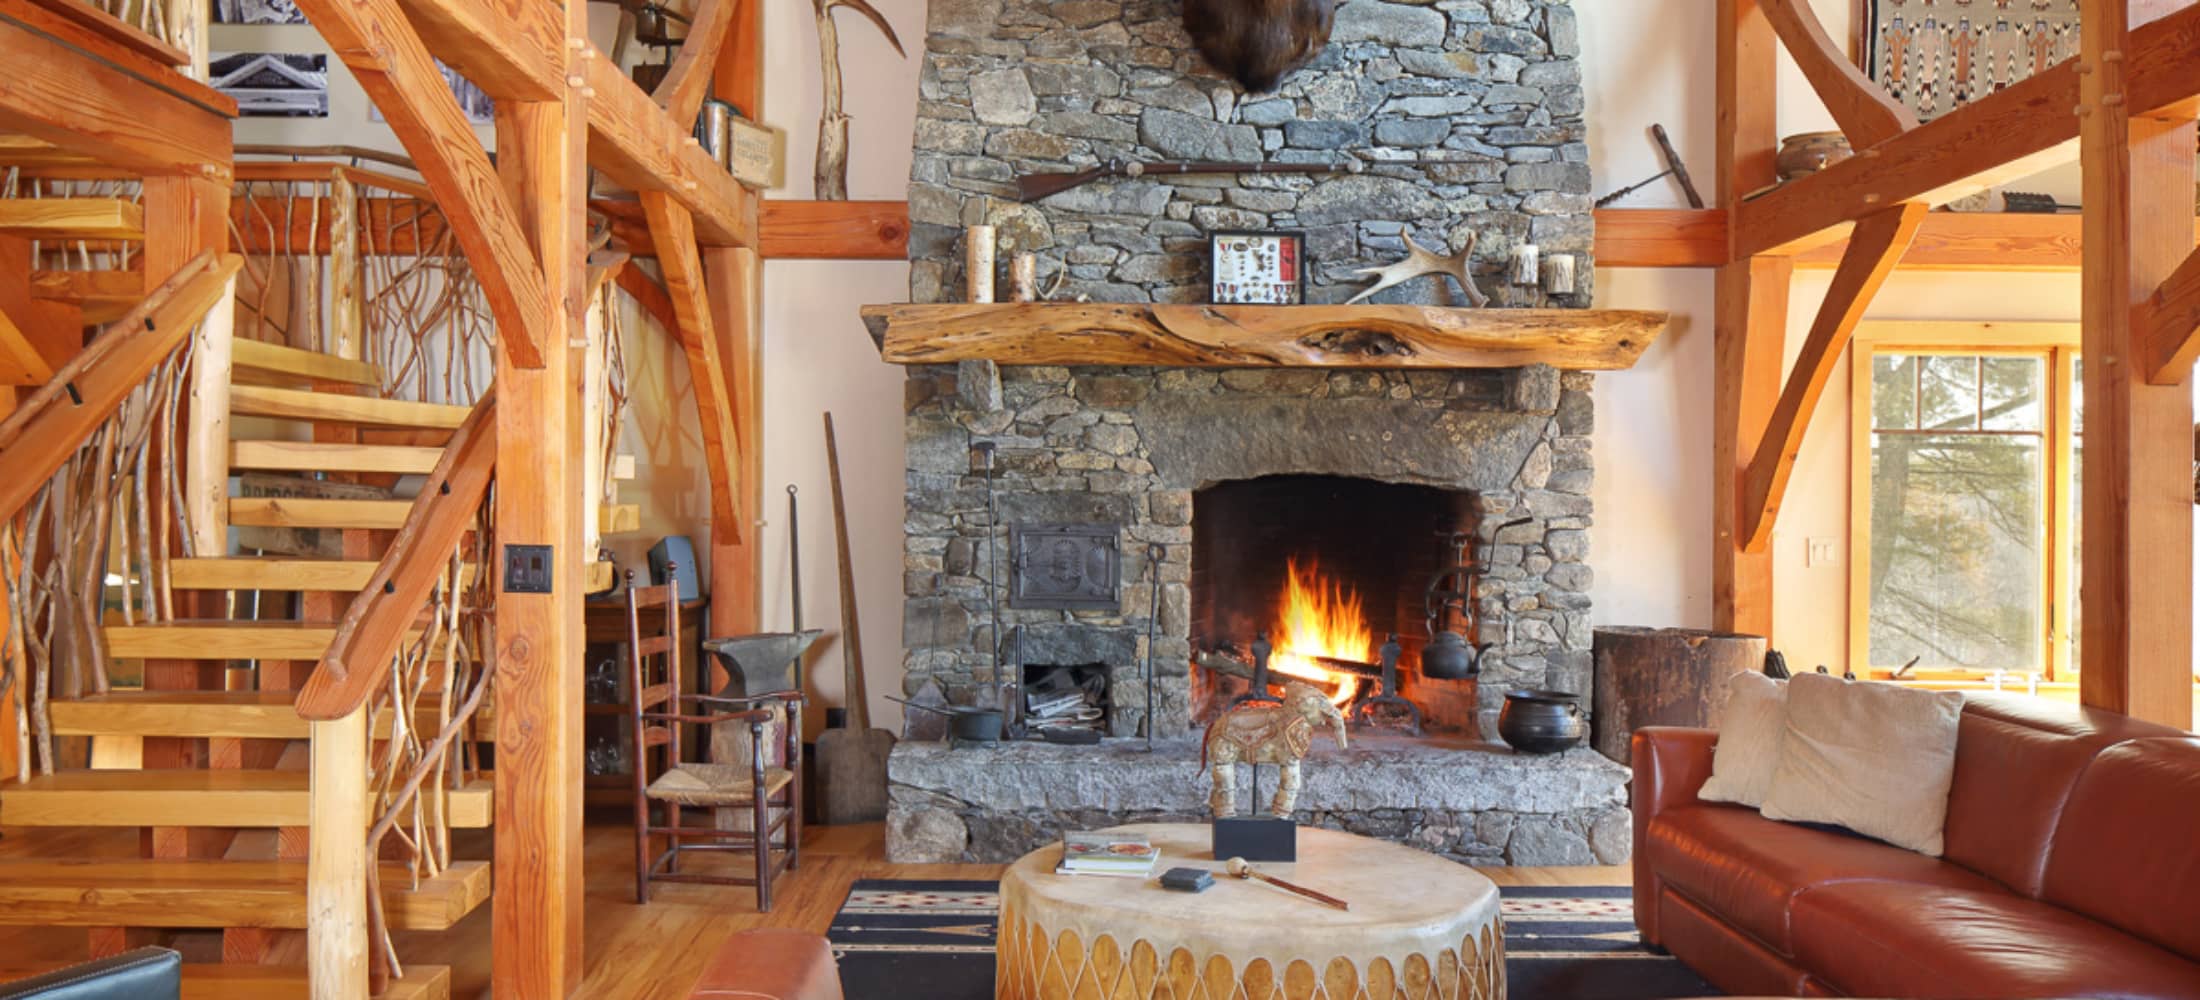 Cozy fireplace in timber frame home